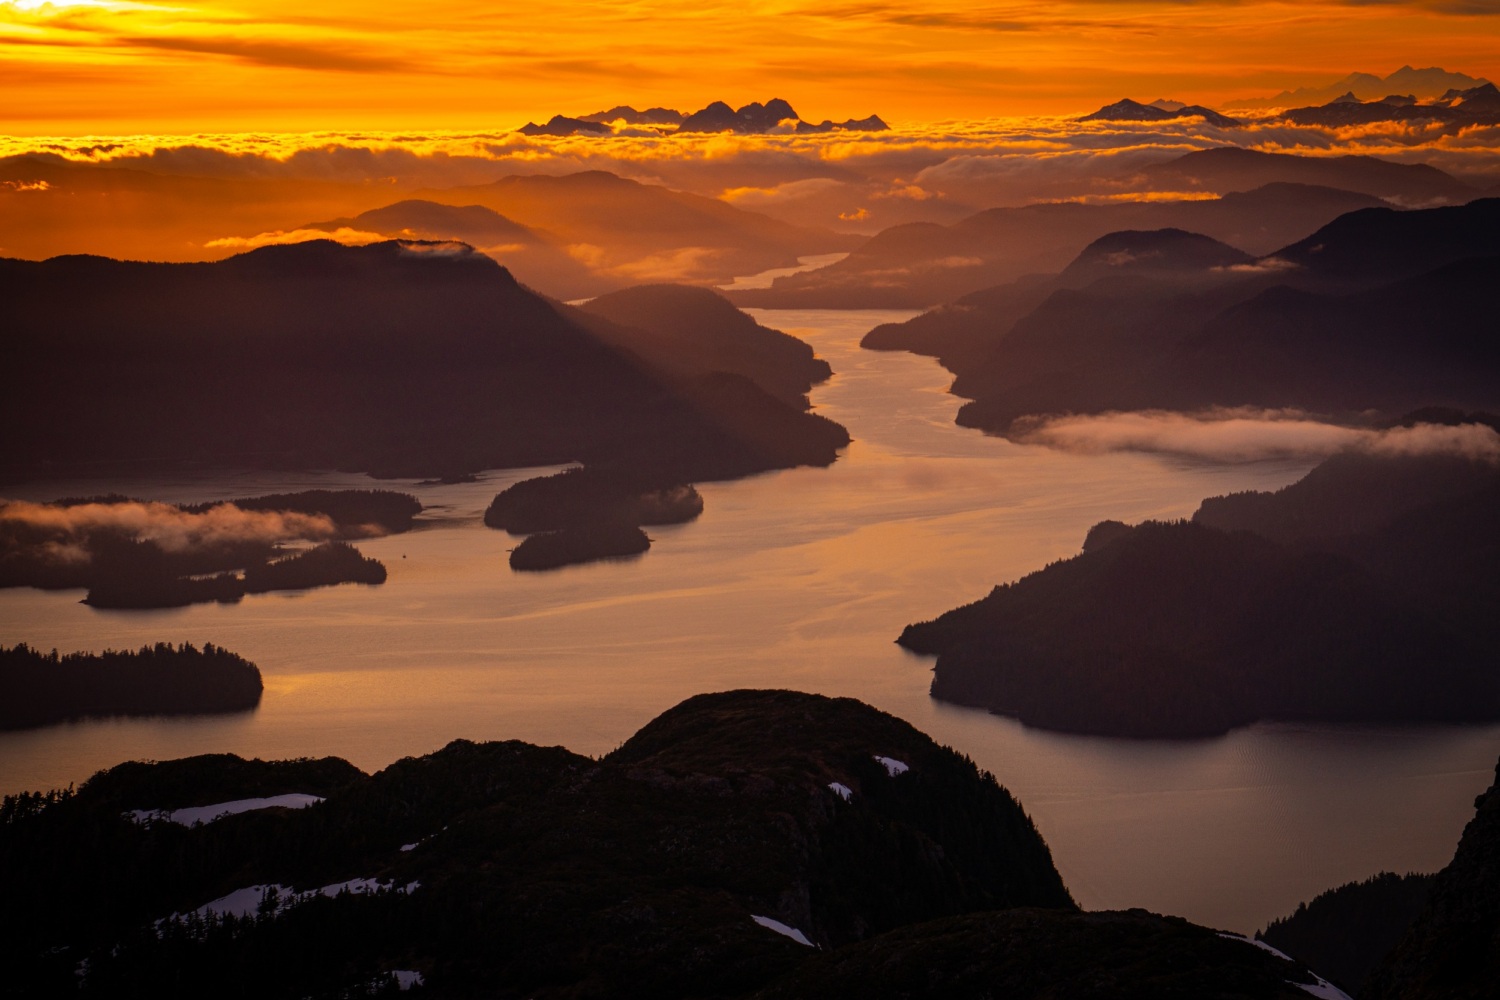 Harbor Mountain, looking out into the Inside Passage at sunset.